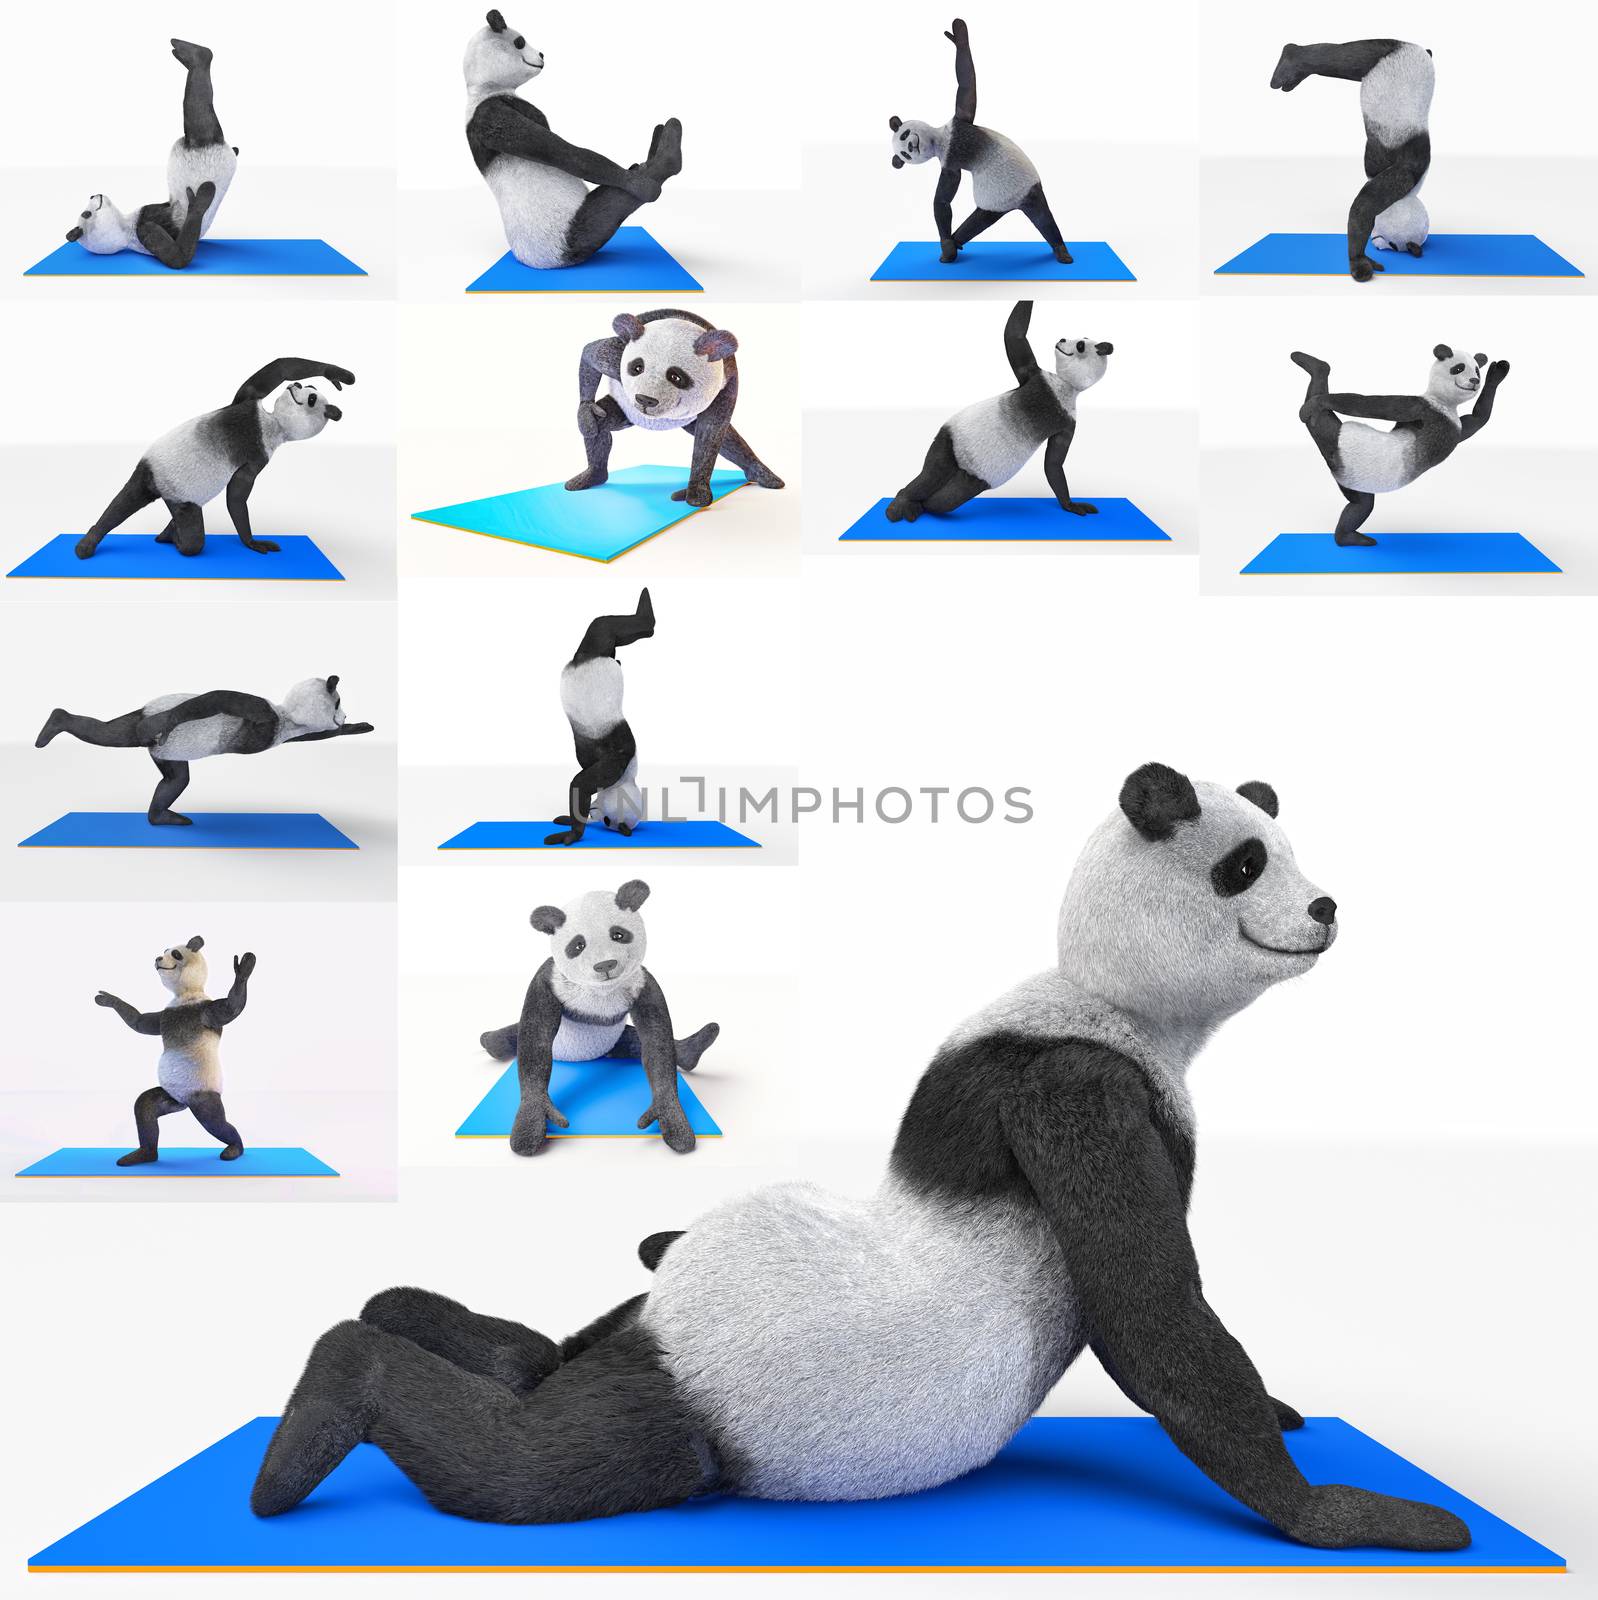 animal panda athlete sportsman doing yoga stretching workout. protagonist character collage collection athletic sports. set illustrations poses sports, strengthening muscular system, improving health